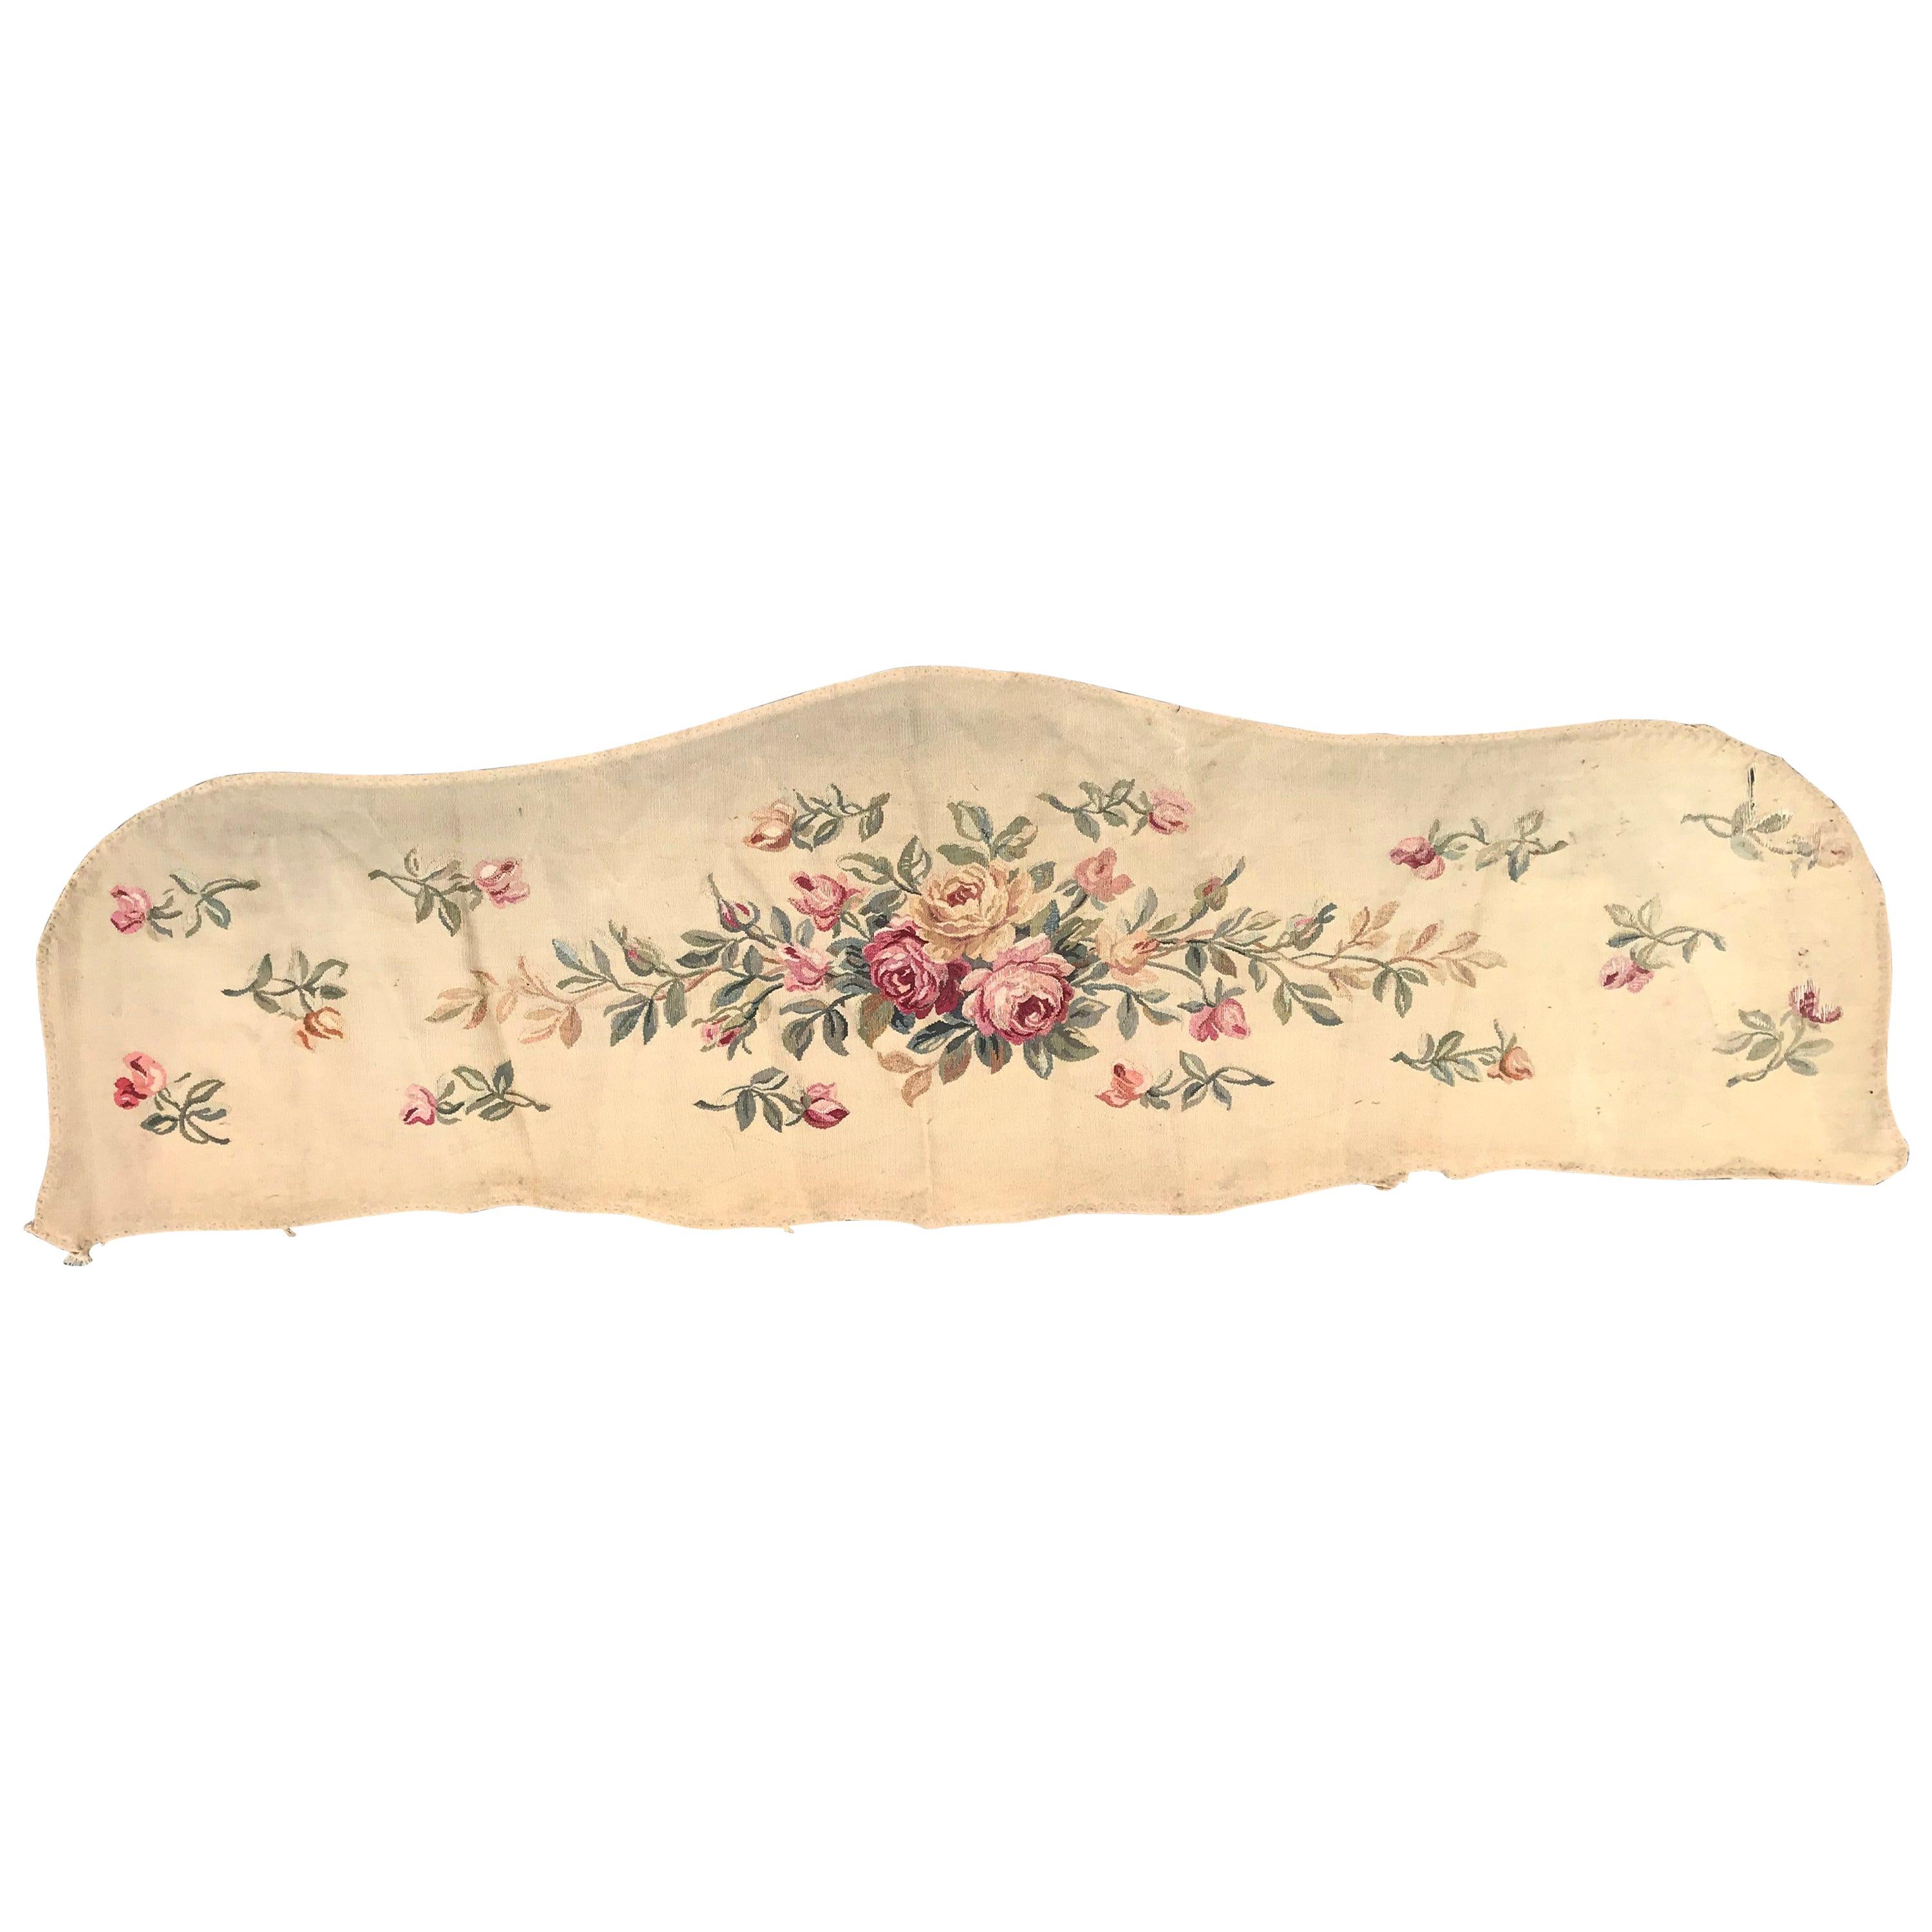 Early 20th Century Aubusson Bed Tapestry